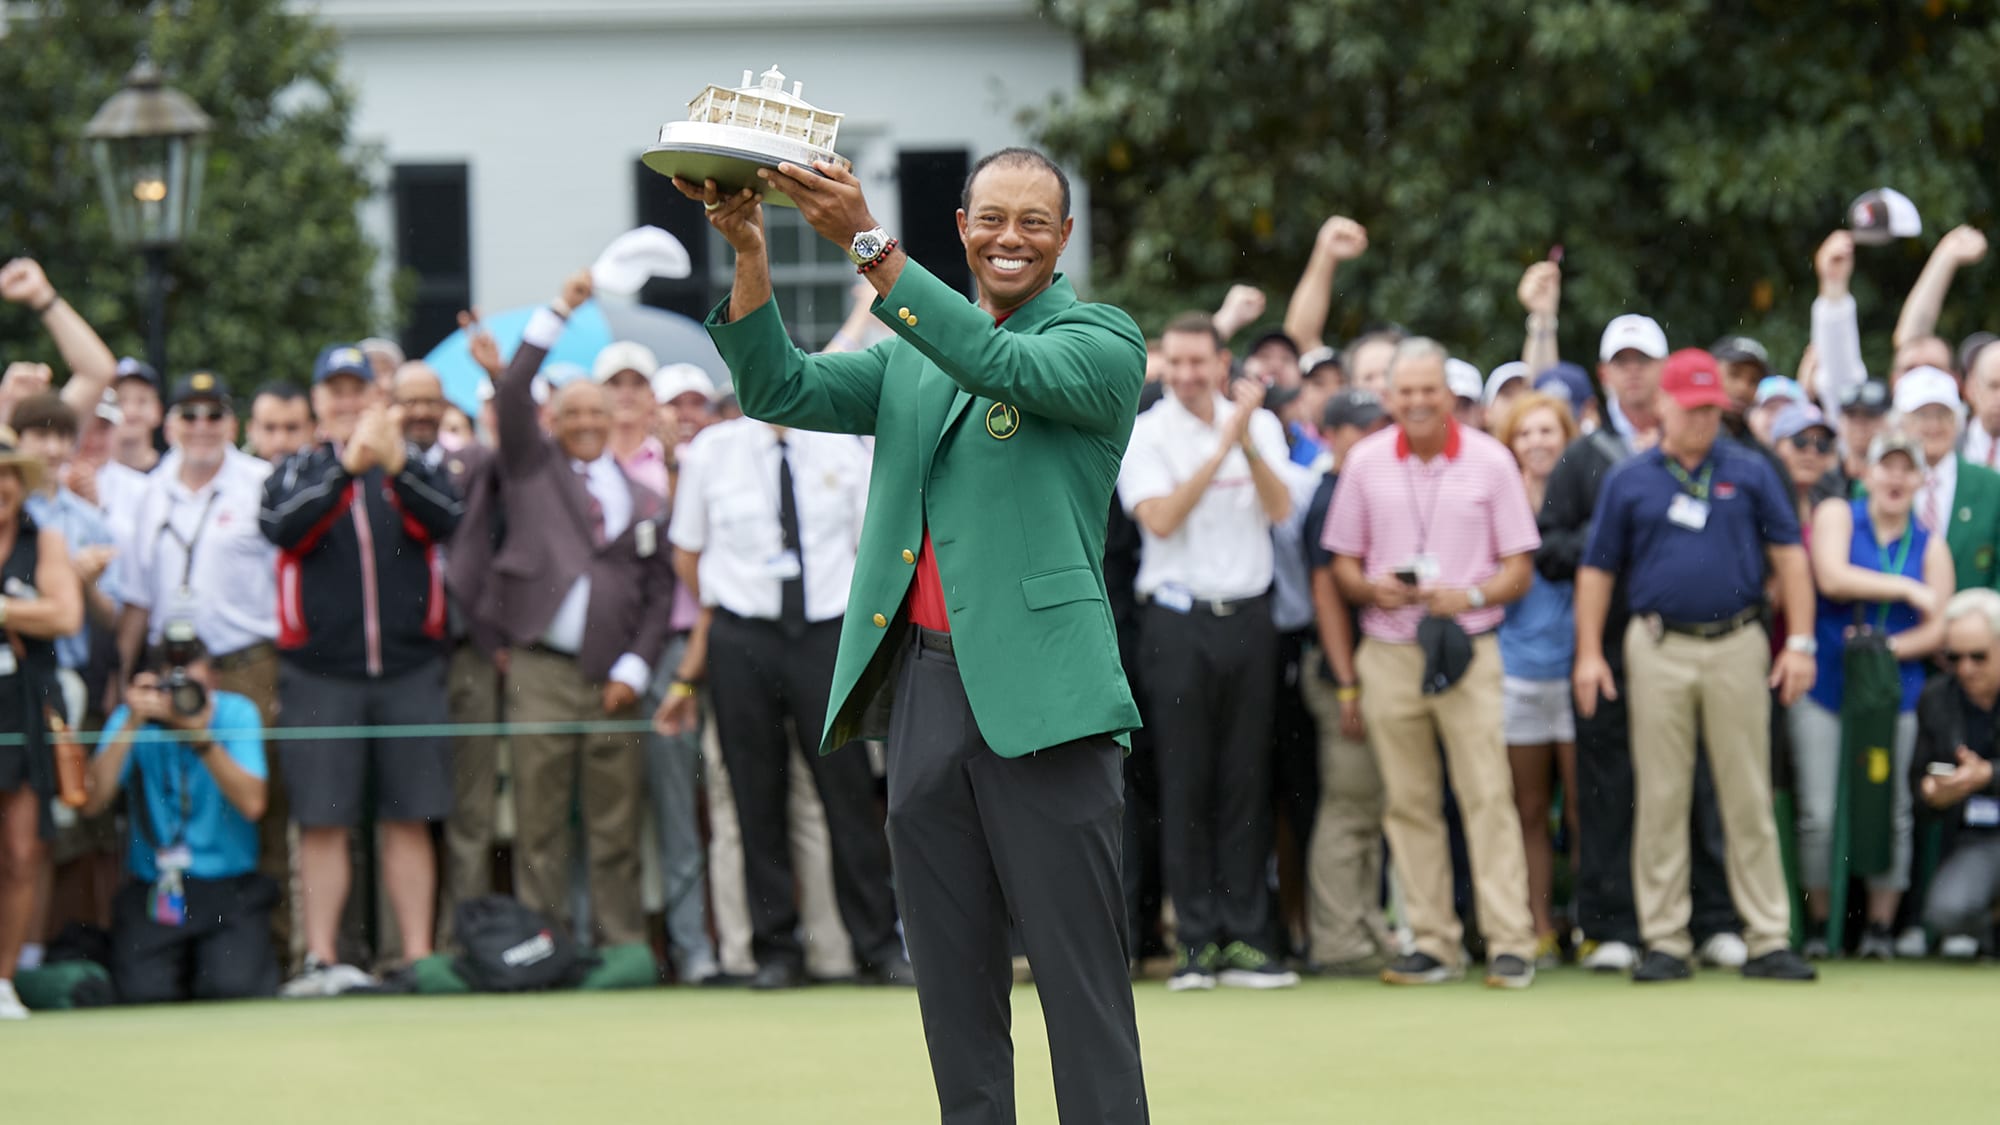 Tiger Woods and the trophy after winning the 2019 Masters.